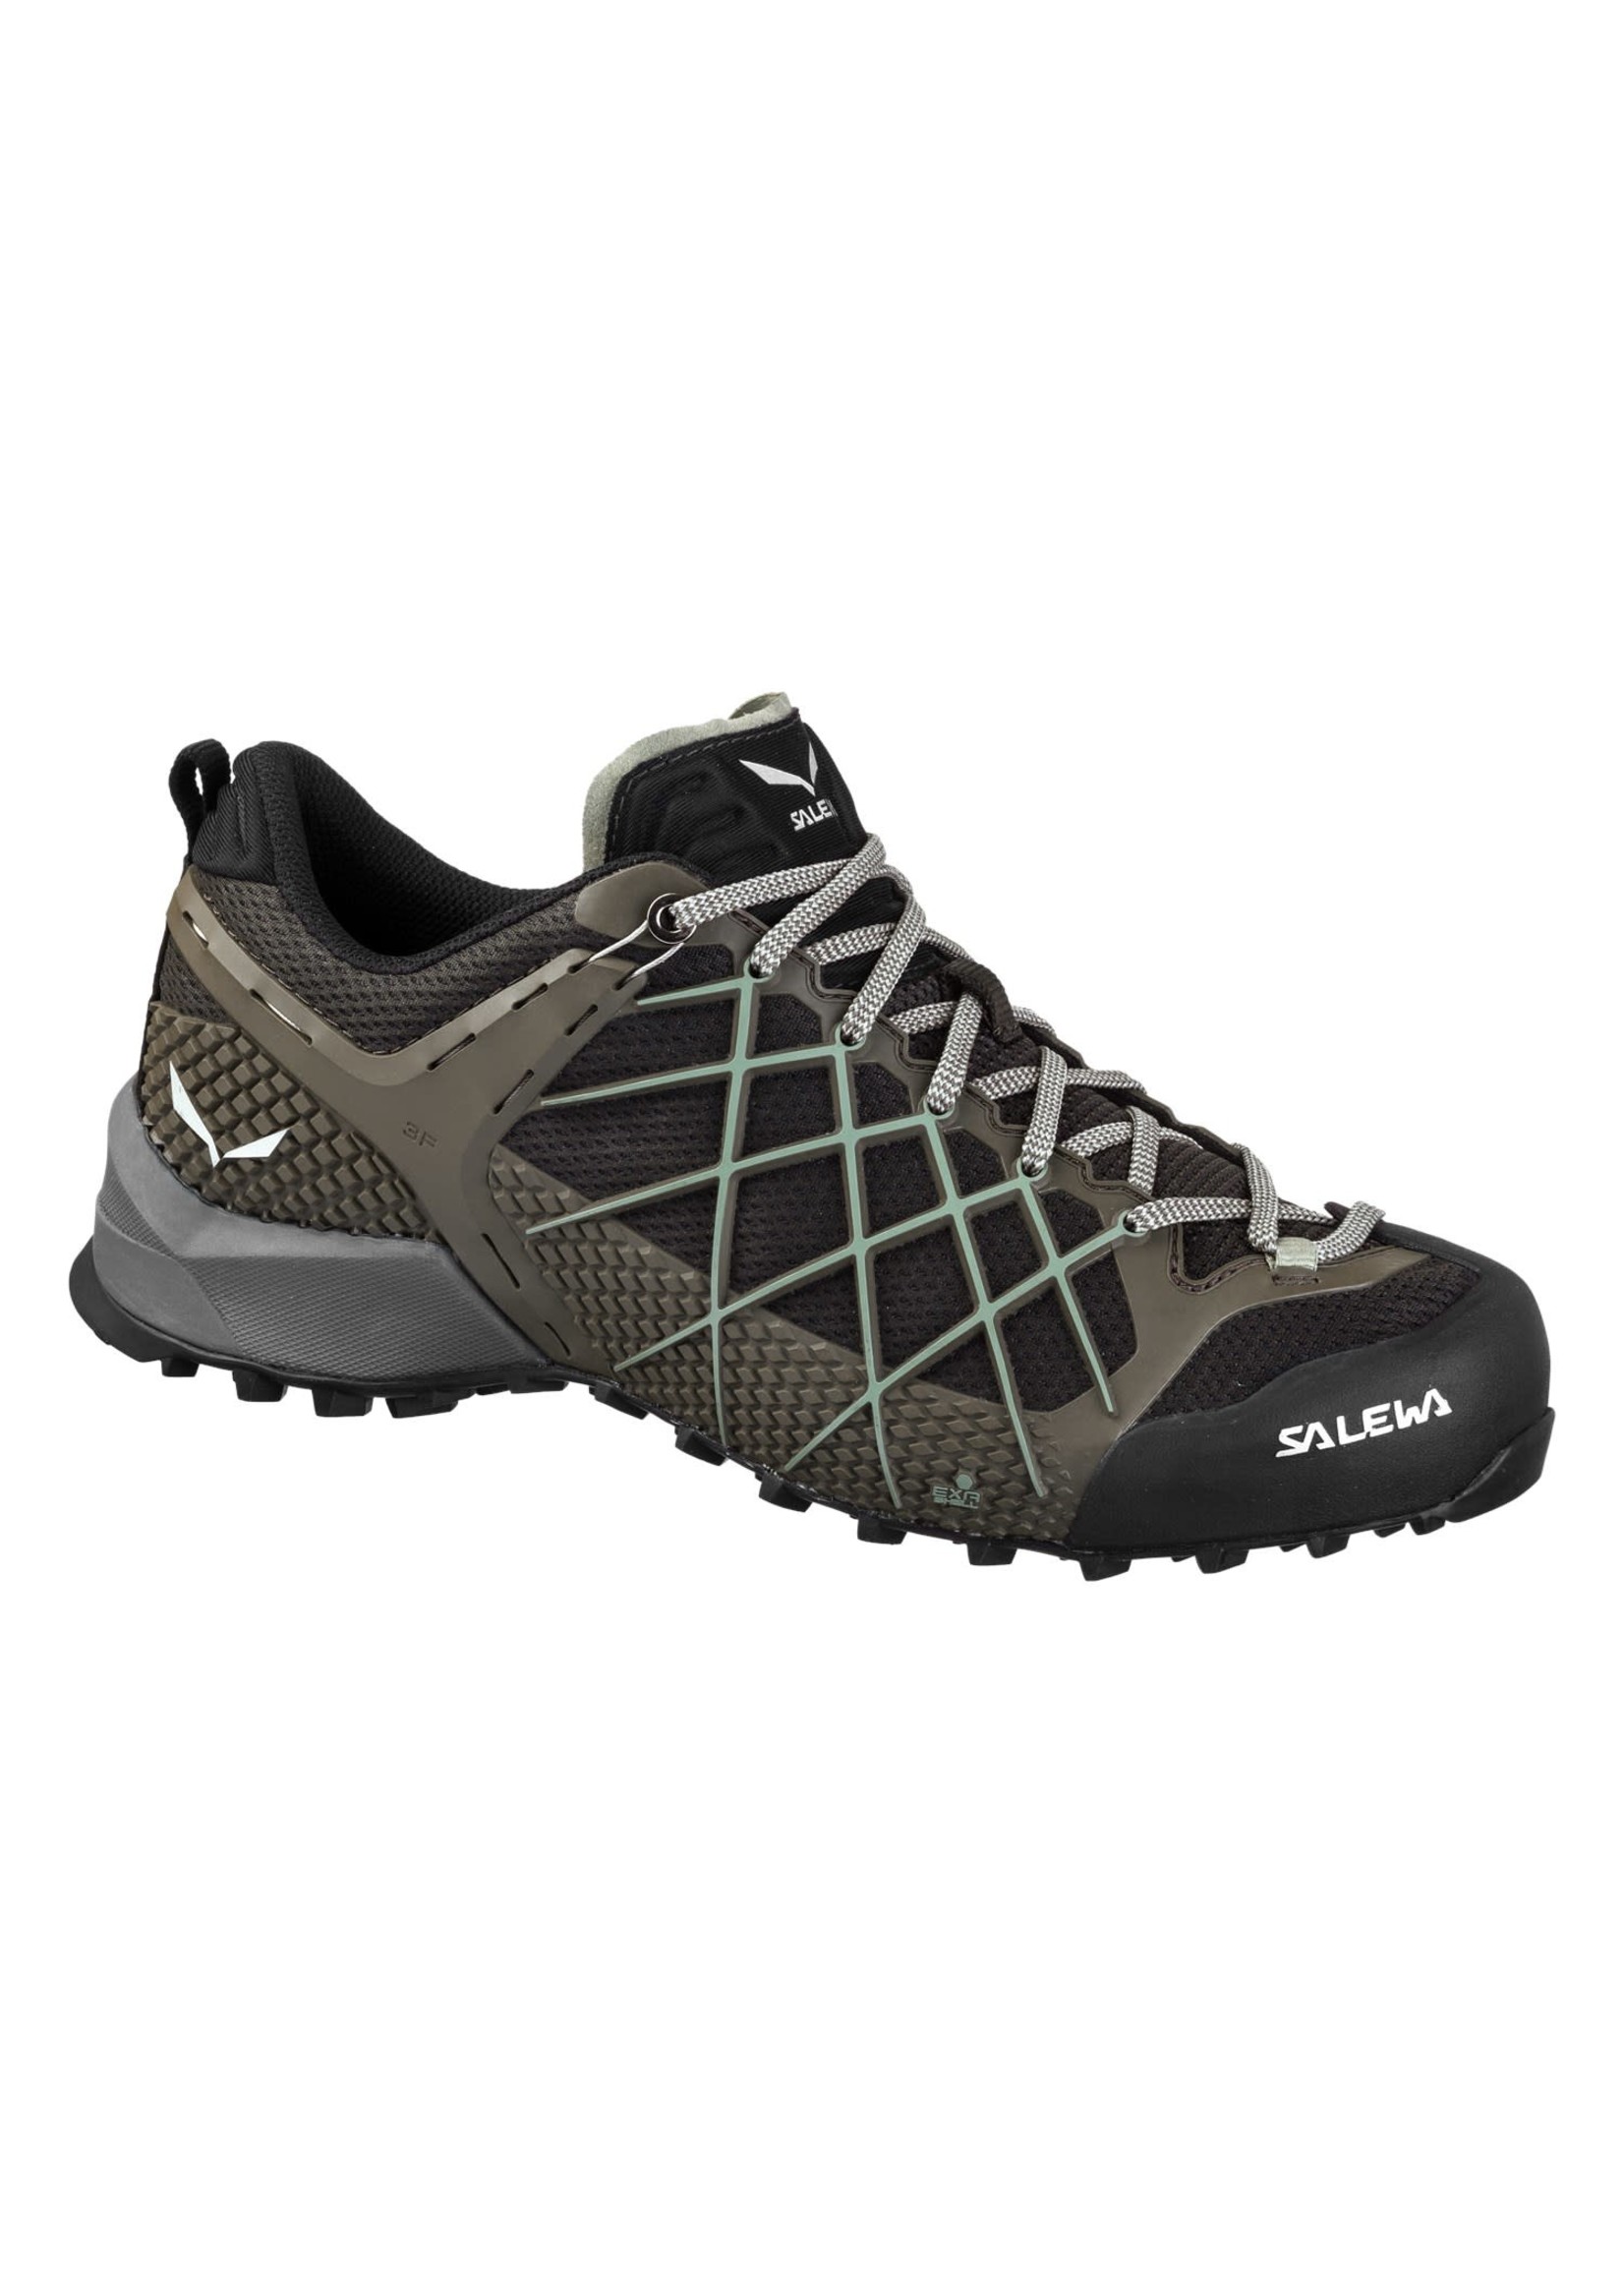 Salewa Souliers d'approche Wildfire pour hommes